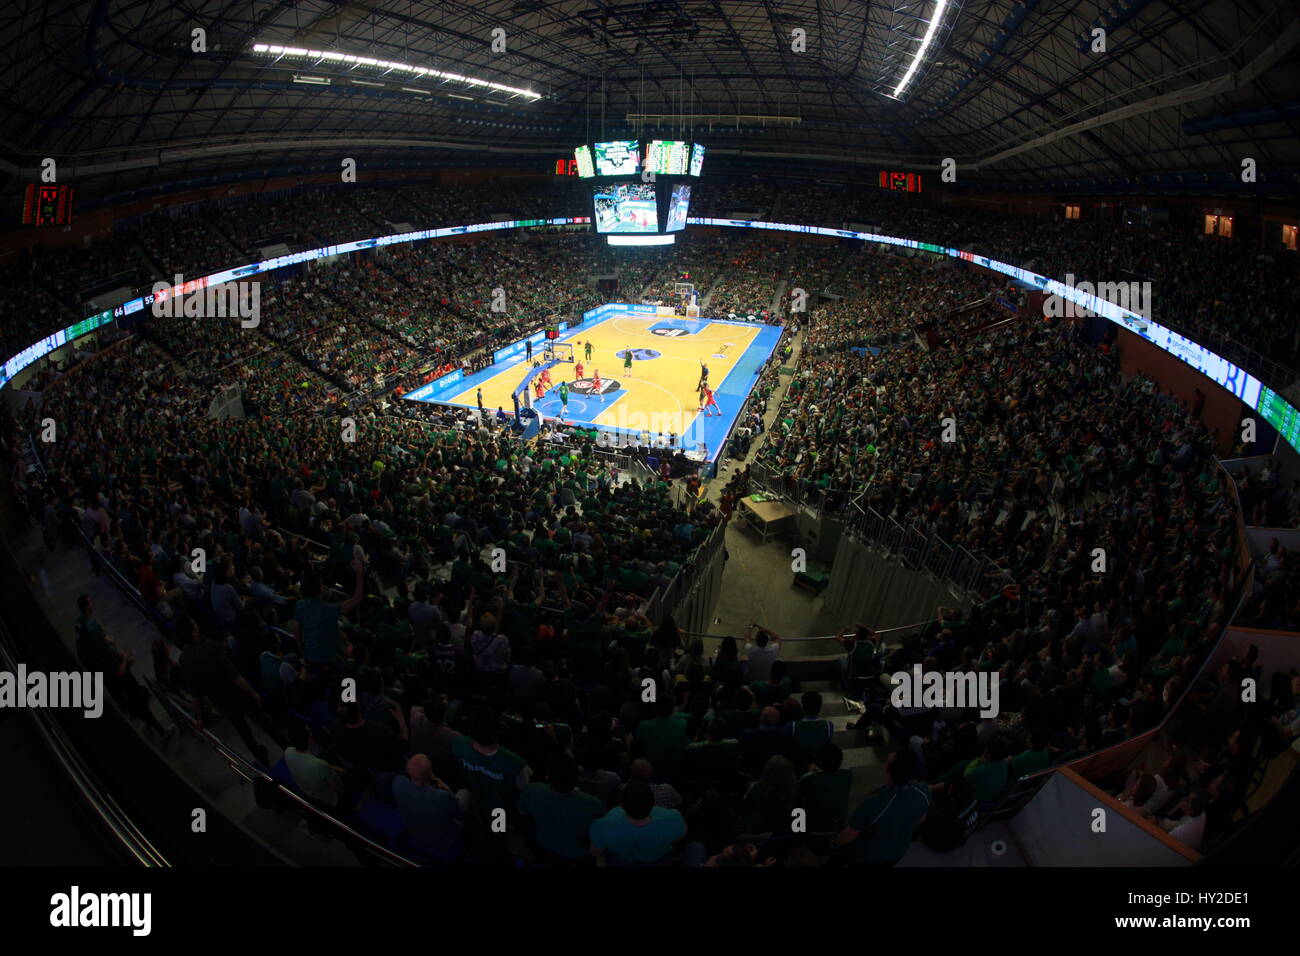 March 31, 2017 - Victoria del Unicaja Malaga basketball in the Second game  of Eurocup final between Unicaja and Valencia during the Eurocup second  play off final match between Unicaja and Valencia